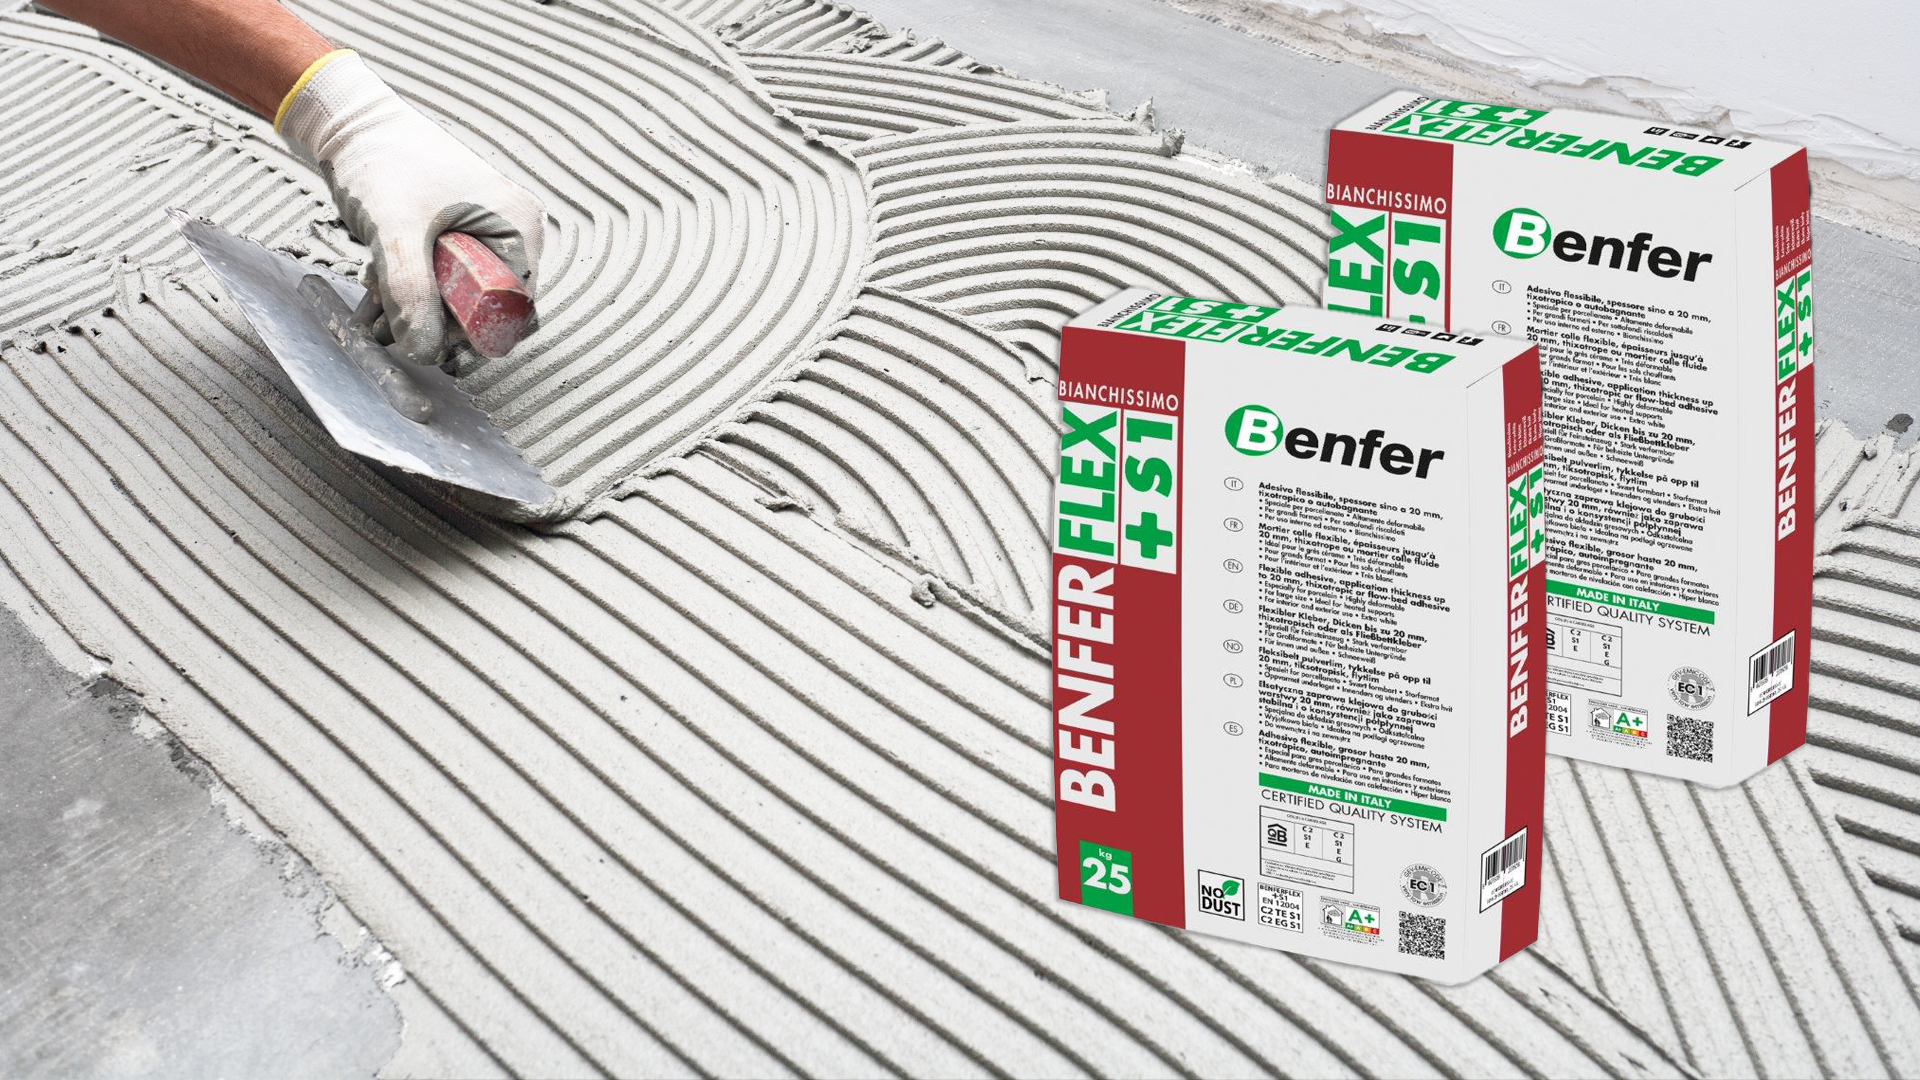 Benferflex+S1 White Adhesive: The Ultimate Guide